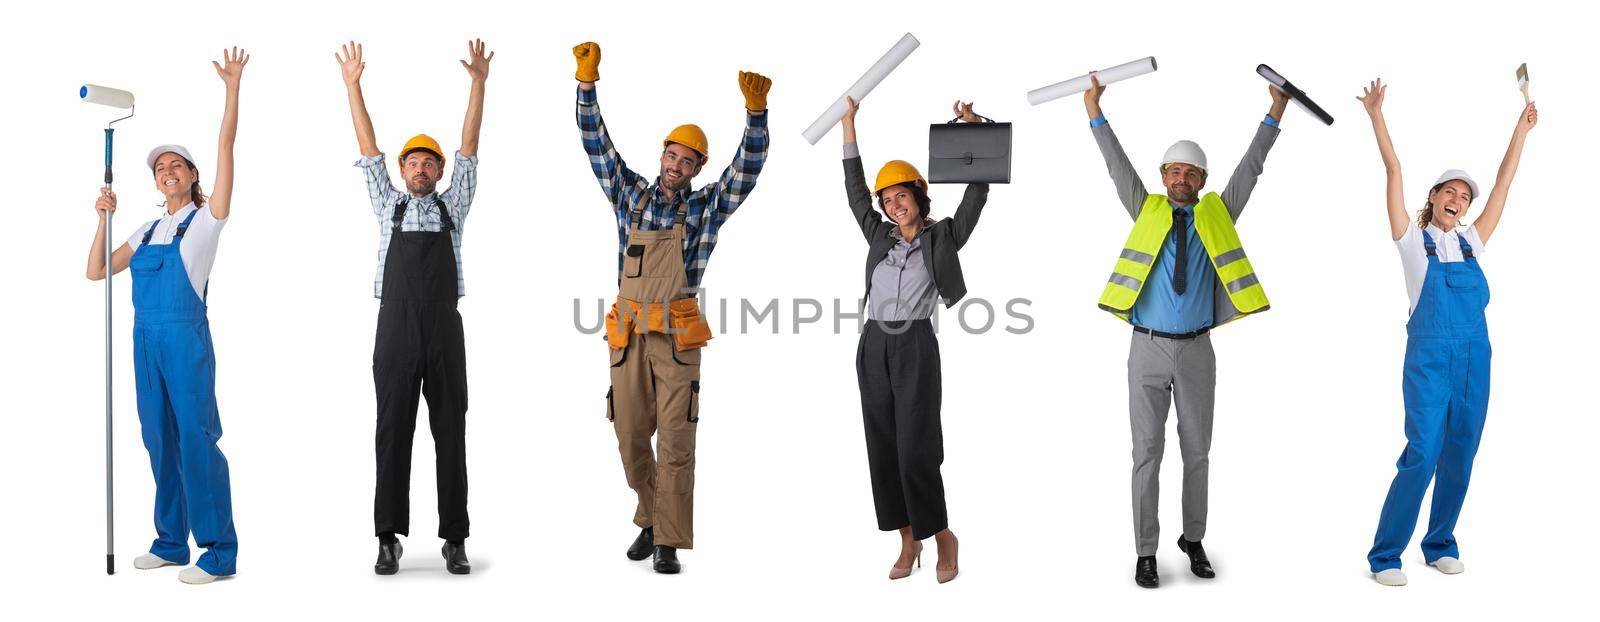 Set of full length portraits of industrial construction workers with raised arms isolated on white background